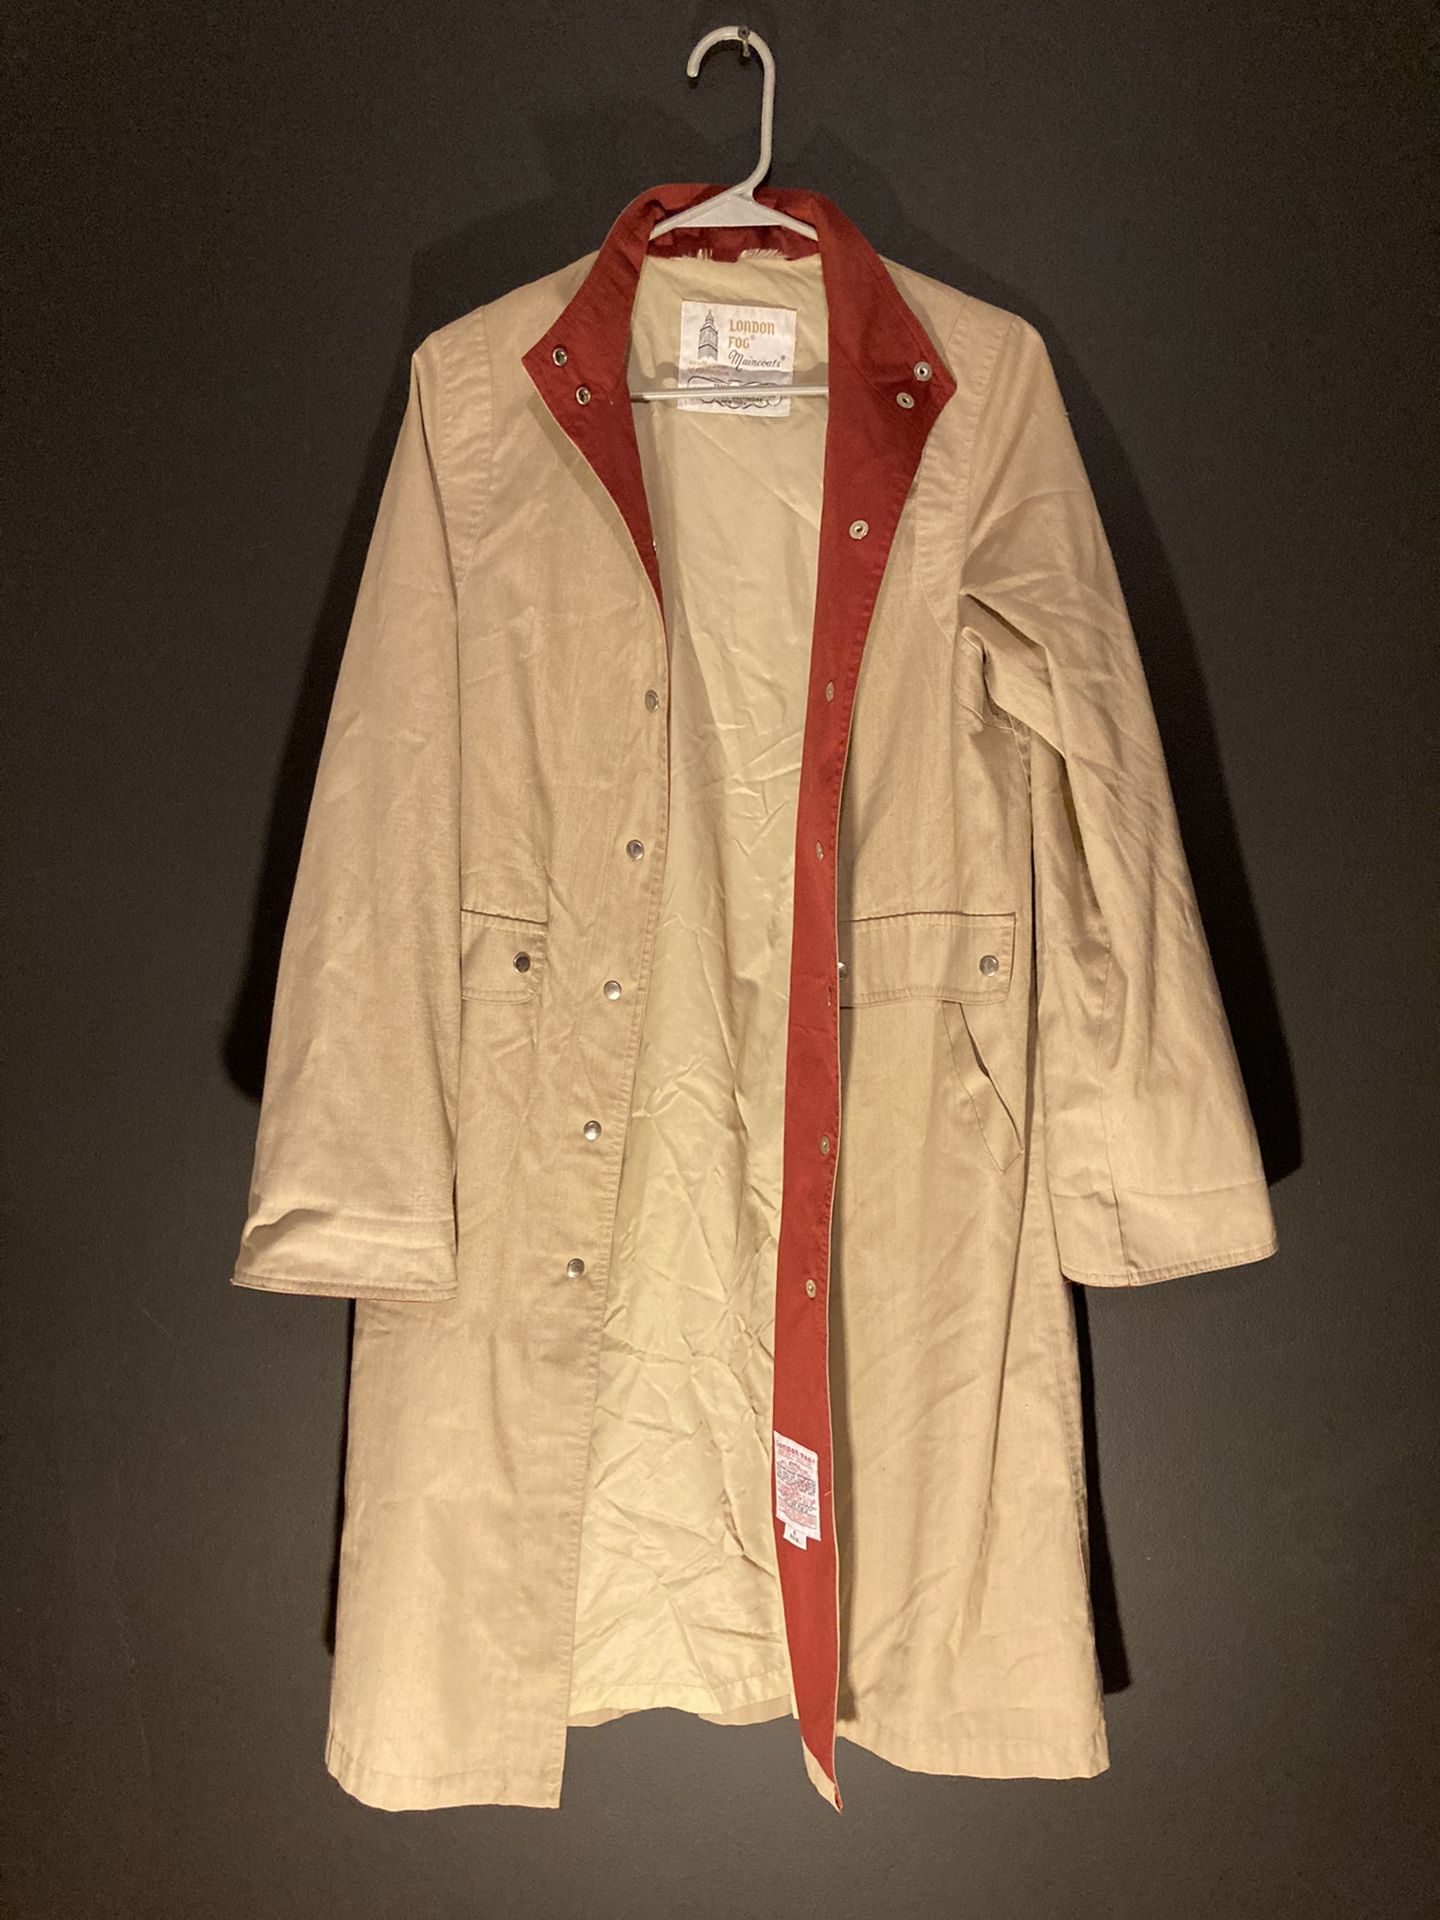 Vintage London Fog Maincoats Trench Coat Woman’s Small (size 6)